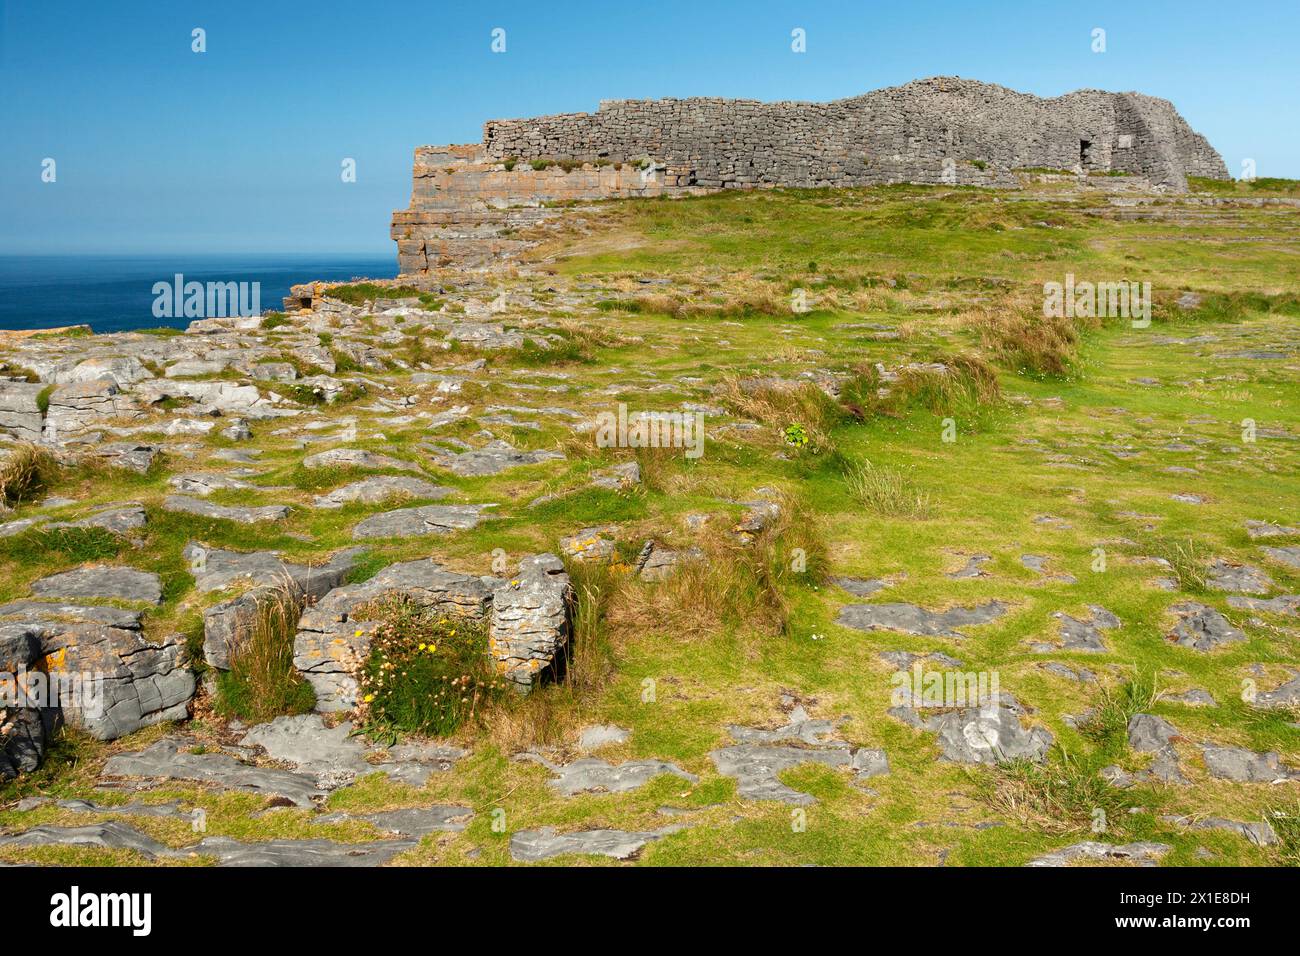 Dun Aonghasa or Dun Aengus fort on the cliff edge on Inishmore island in the Aran islands on the Wild Atlantic Way in Galway in Ireland Europe Stock Photo